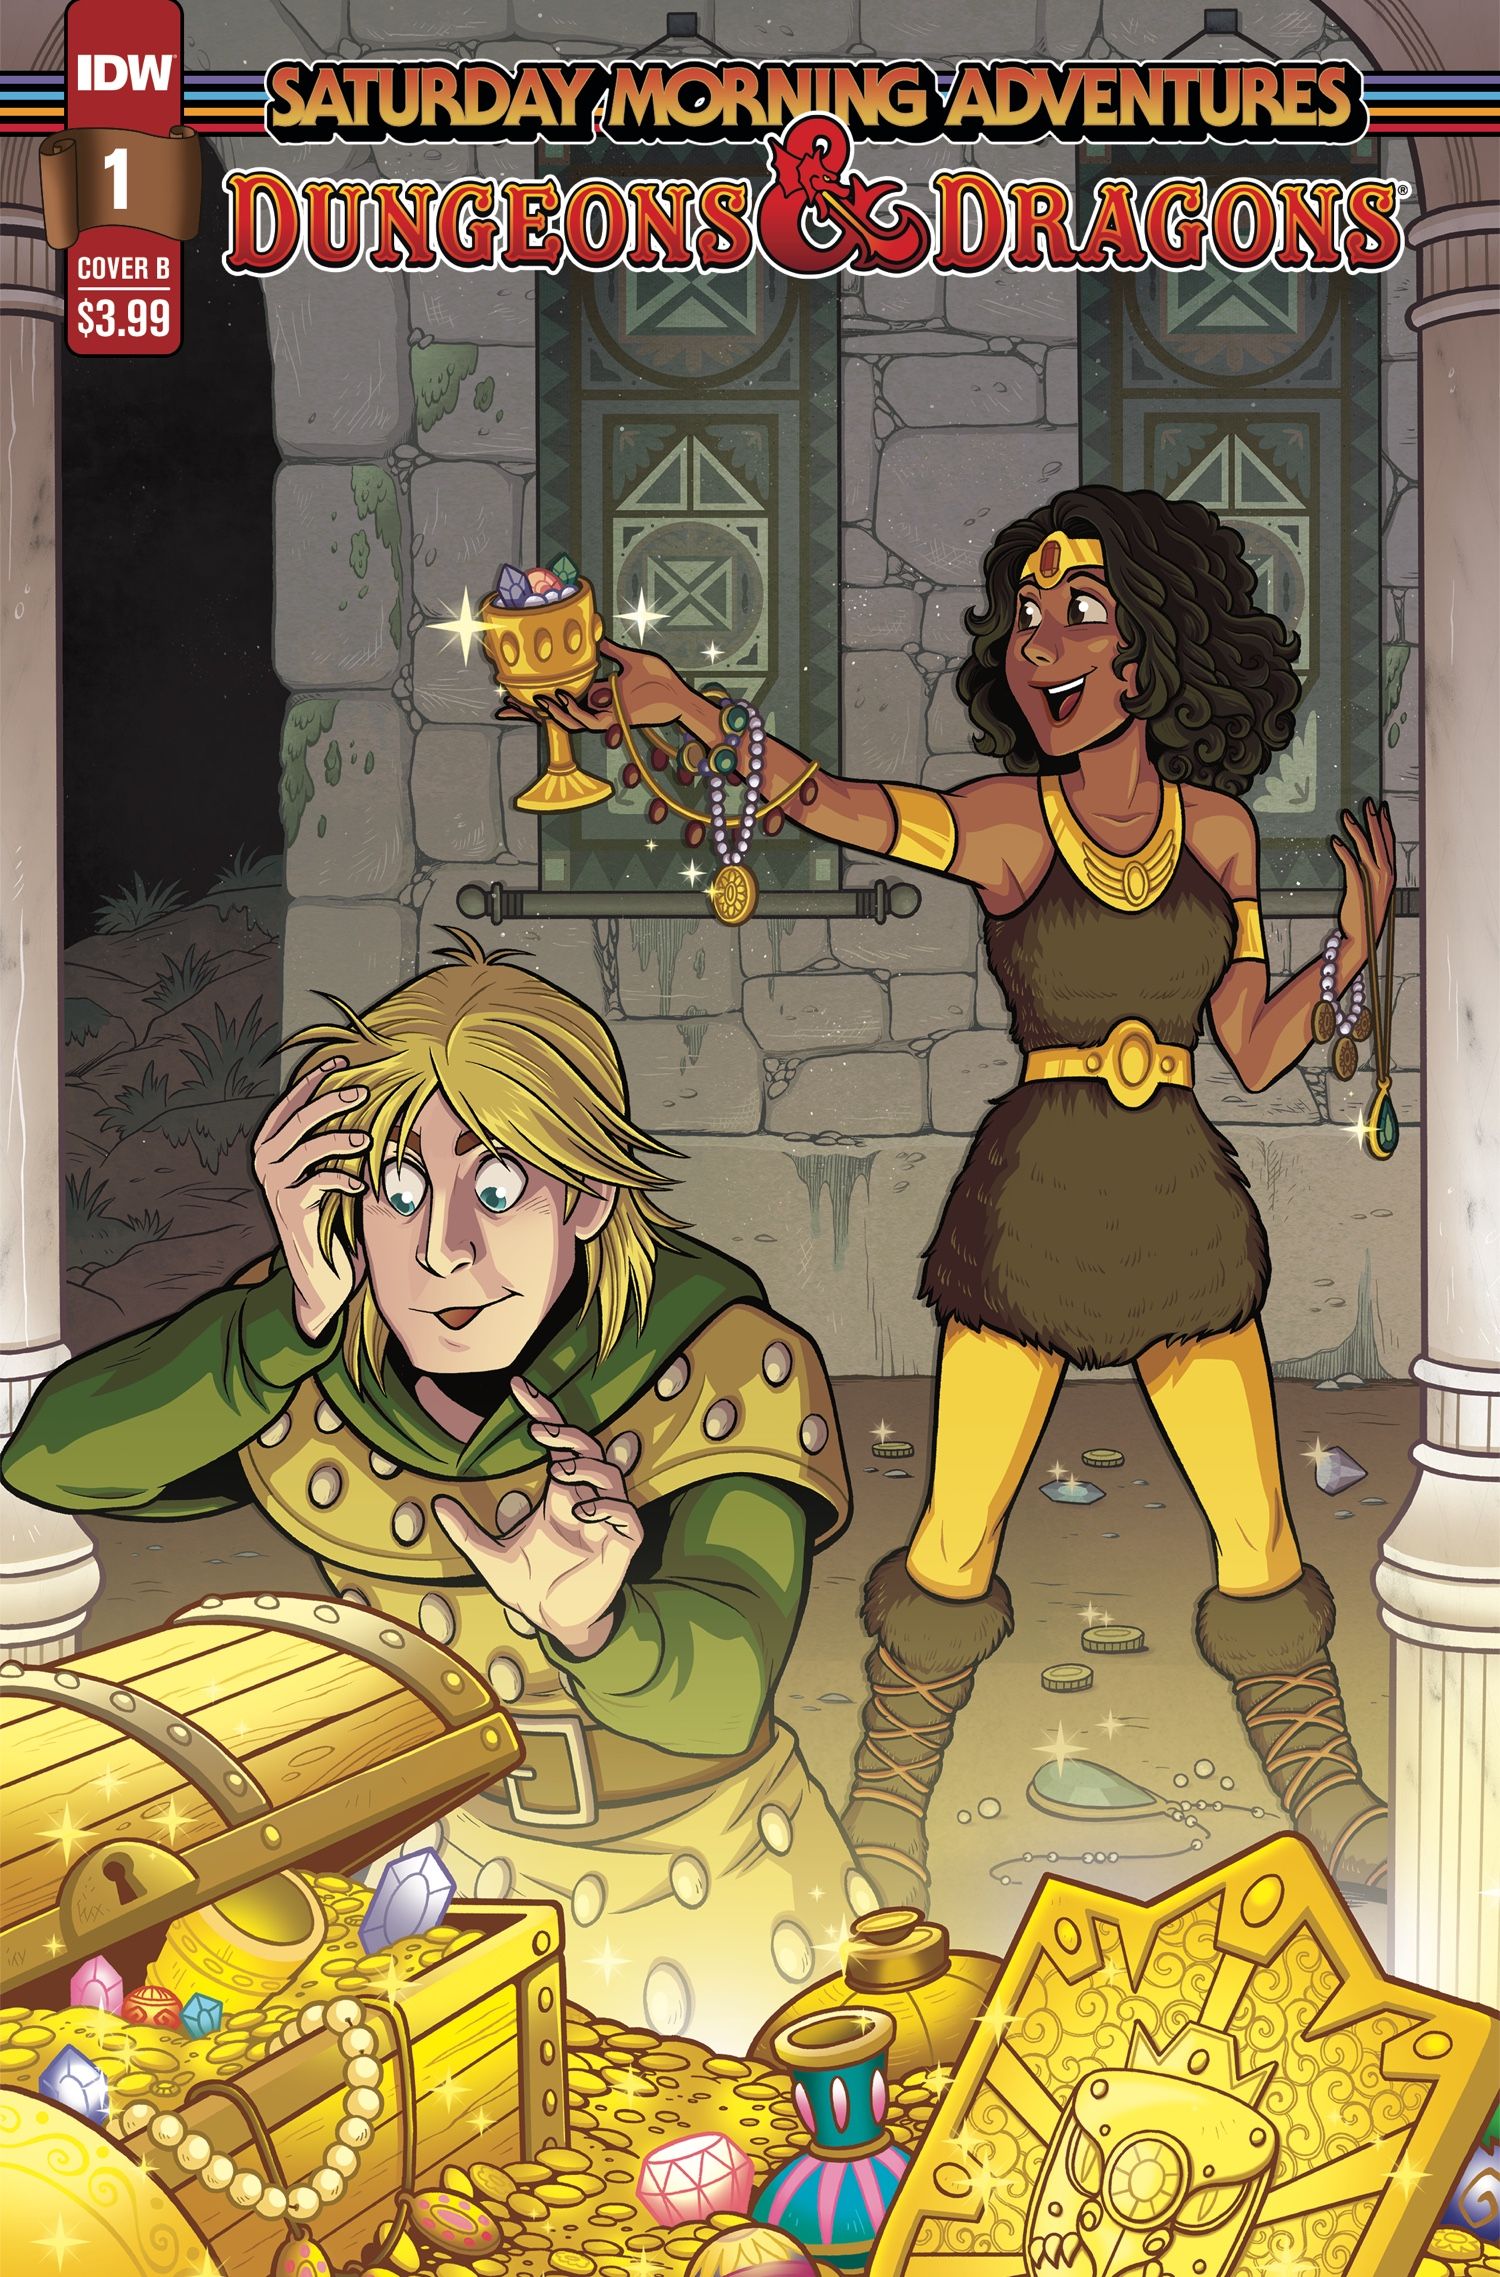 Dungeons & Dragons - Saturday Morning Adventures #1 - Cover B by Brenda Hickey